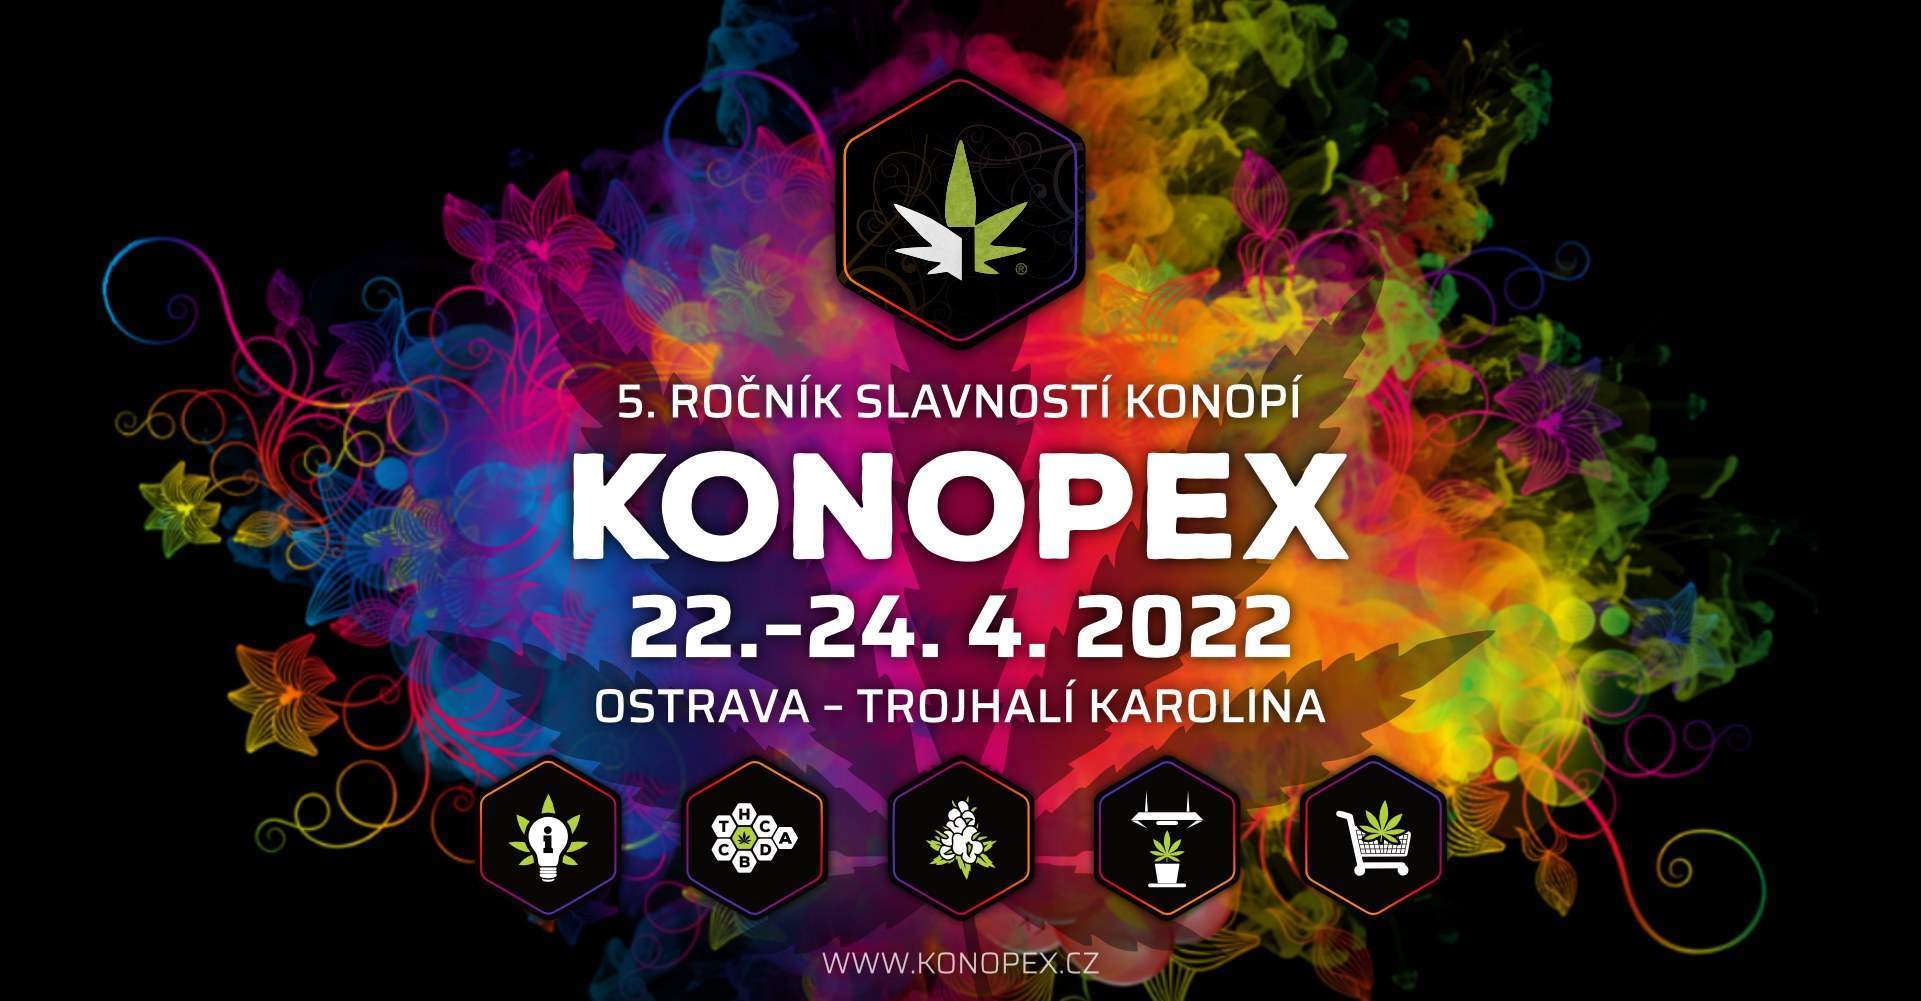 Featured image for “Nukaseeds heading to Konopex in Ostrava 2022”